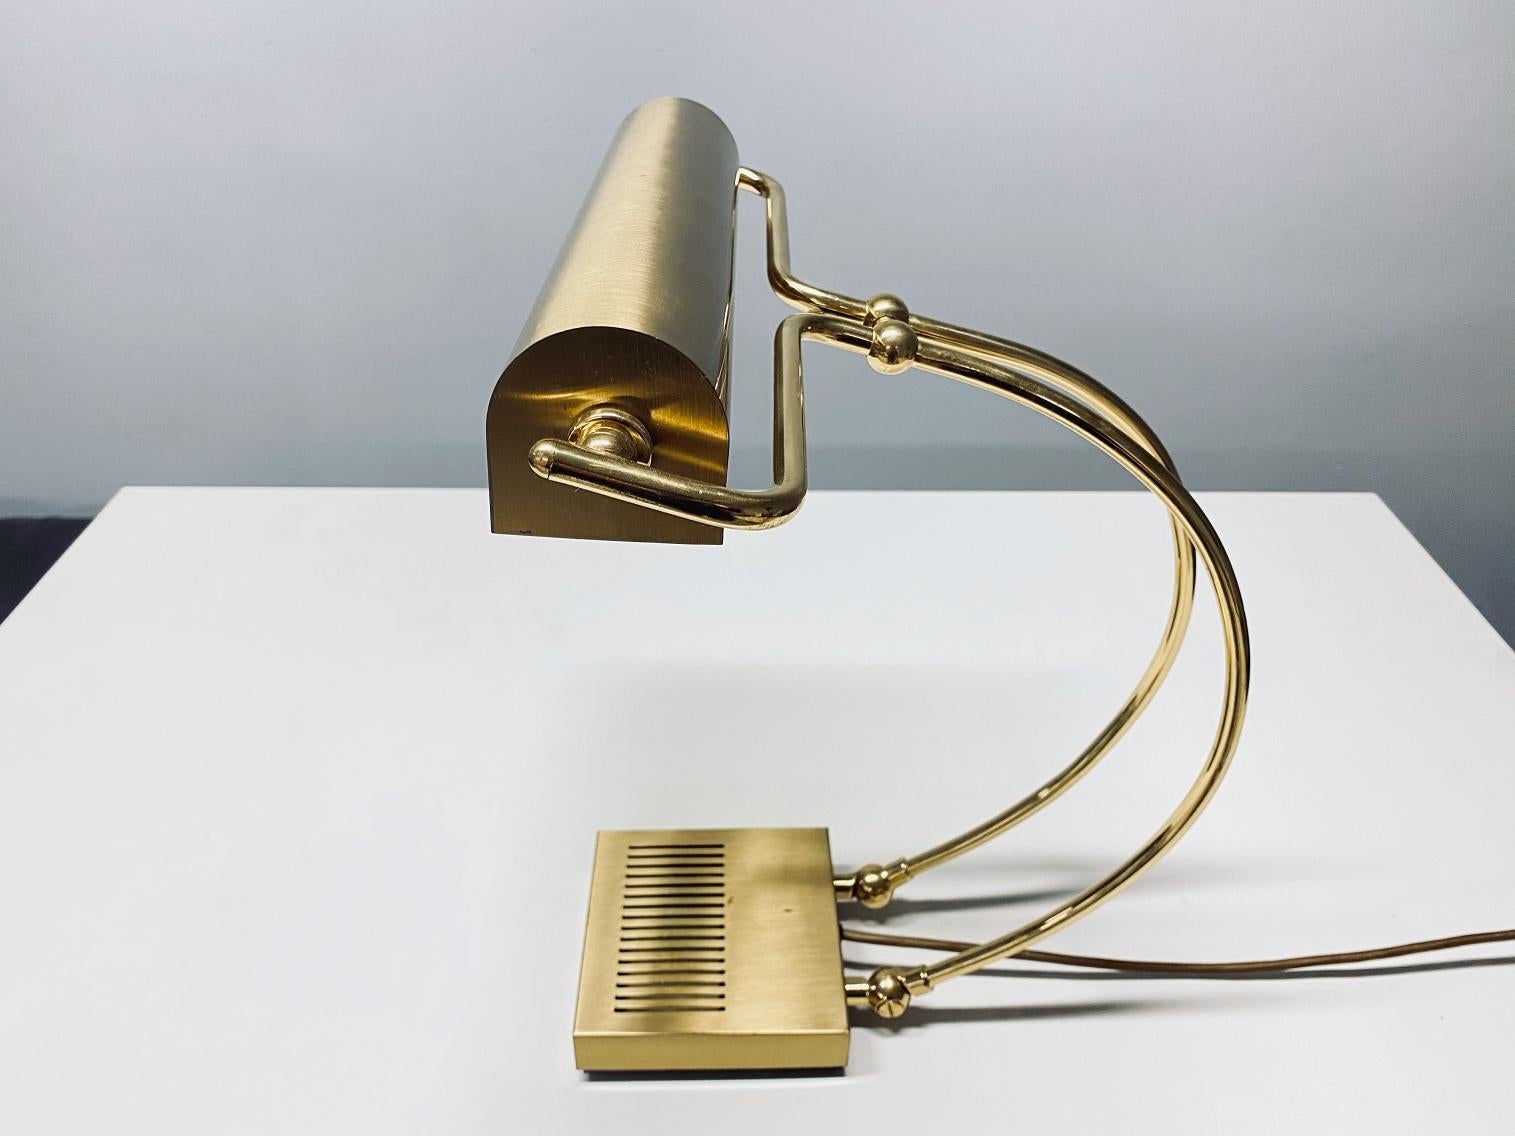 Metalwork Eileen Gray Style Midcentury Brass Table Lamp, 1970s, Germany For Sale